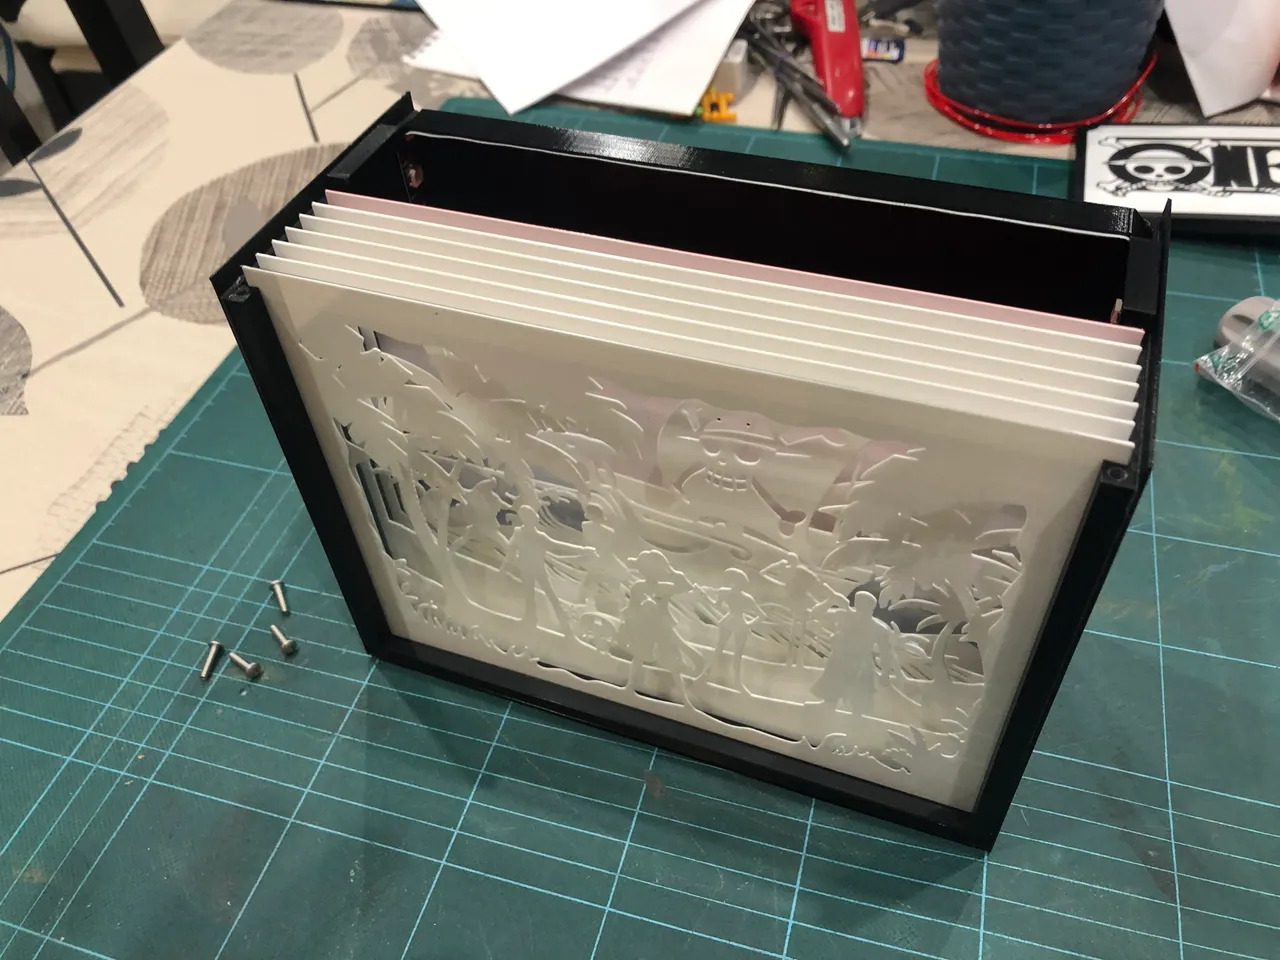 3D Printed One Piece Anime Light Box. Free File On Thingiverse :  r/3Dprinting